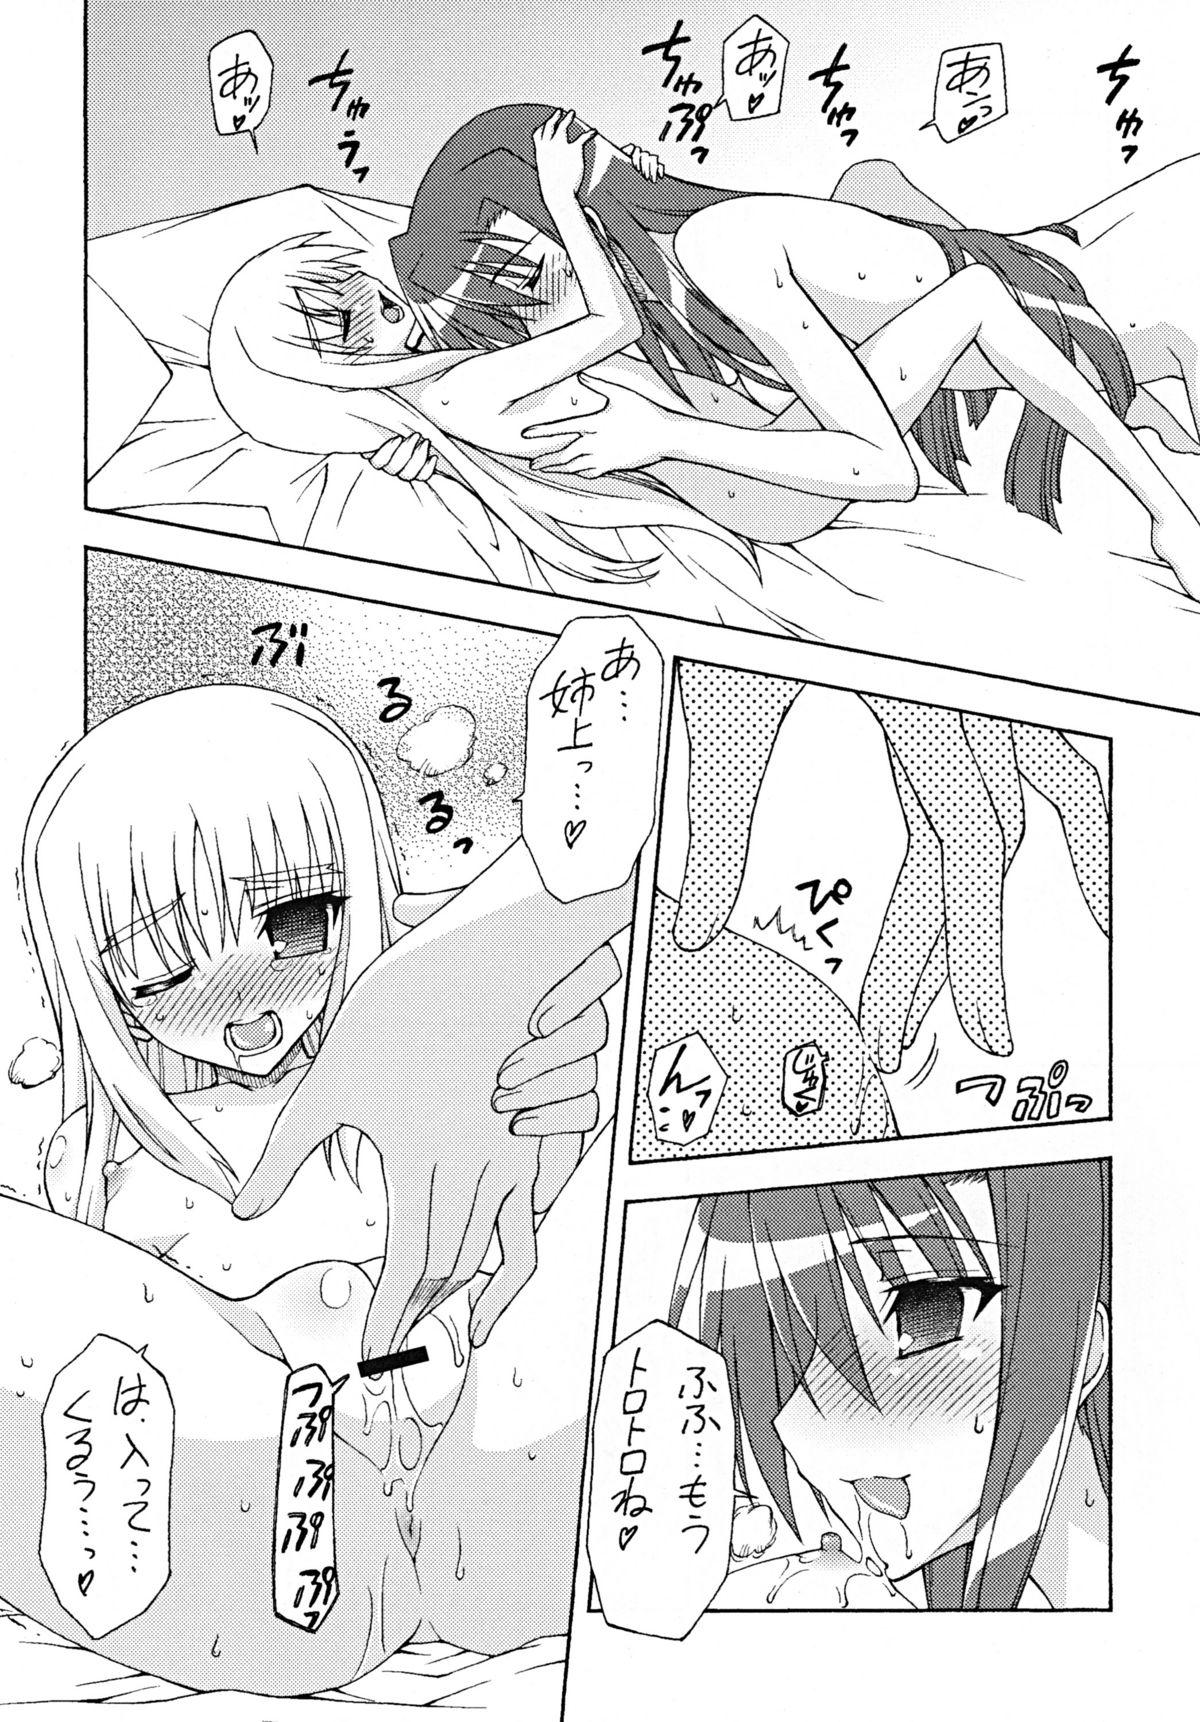 Uncut ANOTHER MORNING - Mahou shoujo lyrical nanoha From - Page 11